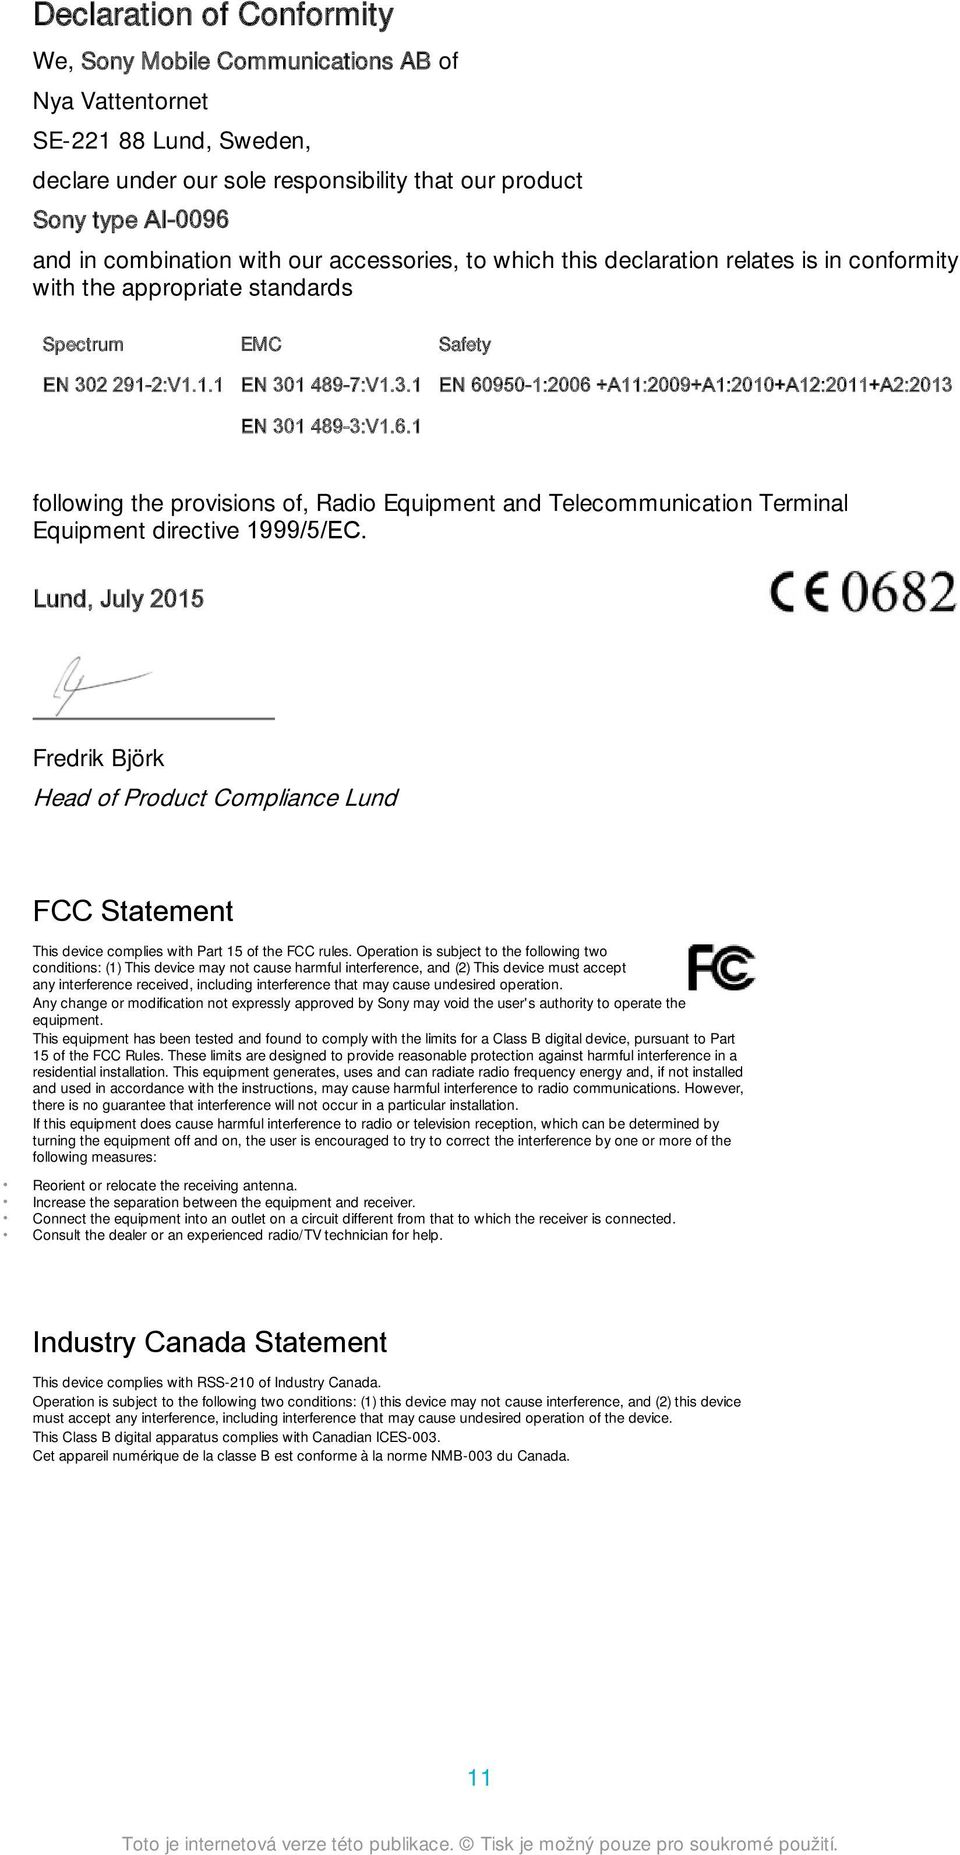 6.1 following the provisions of, Radio Equipment and Telecommunication Terminal Equipment directive 1999/5/EC.